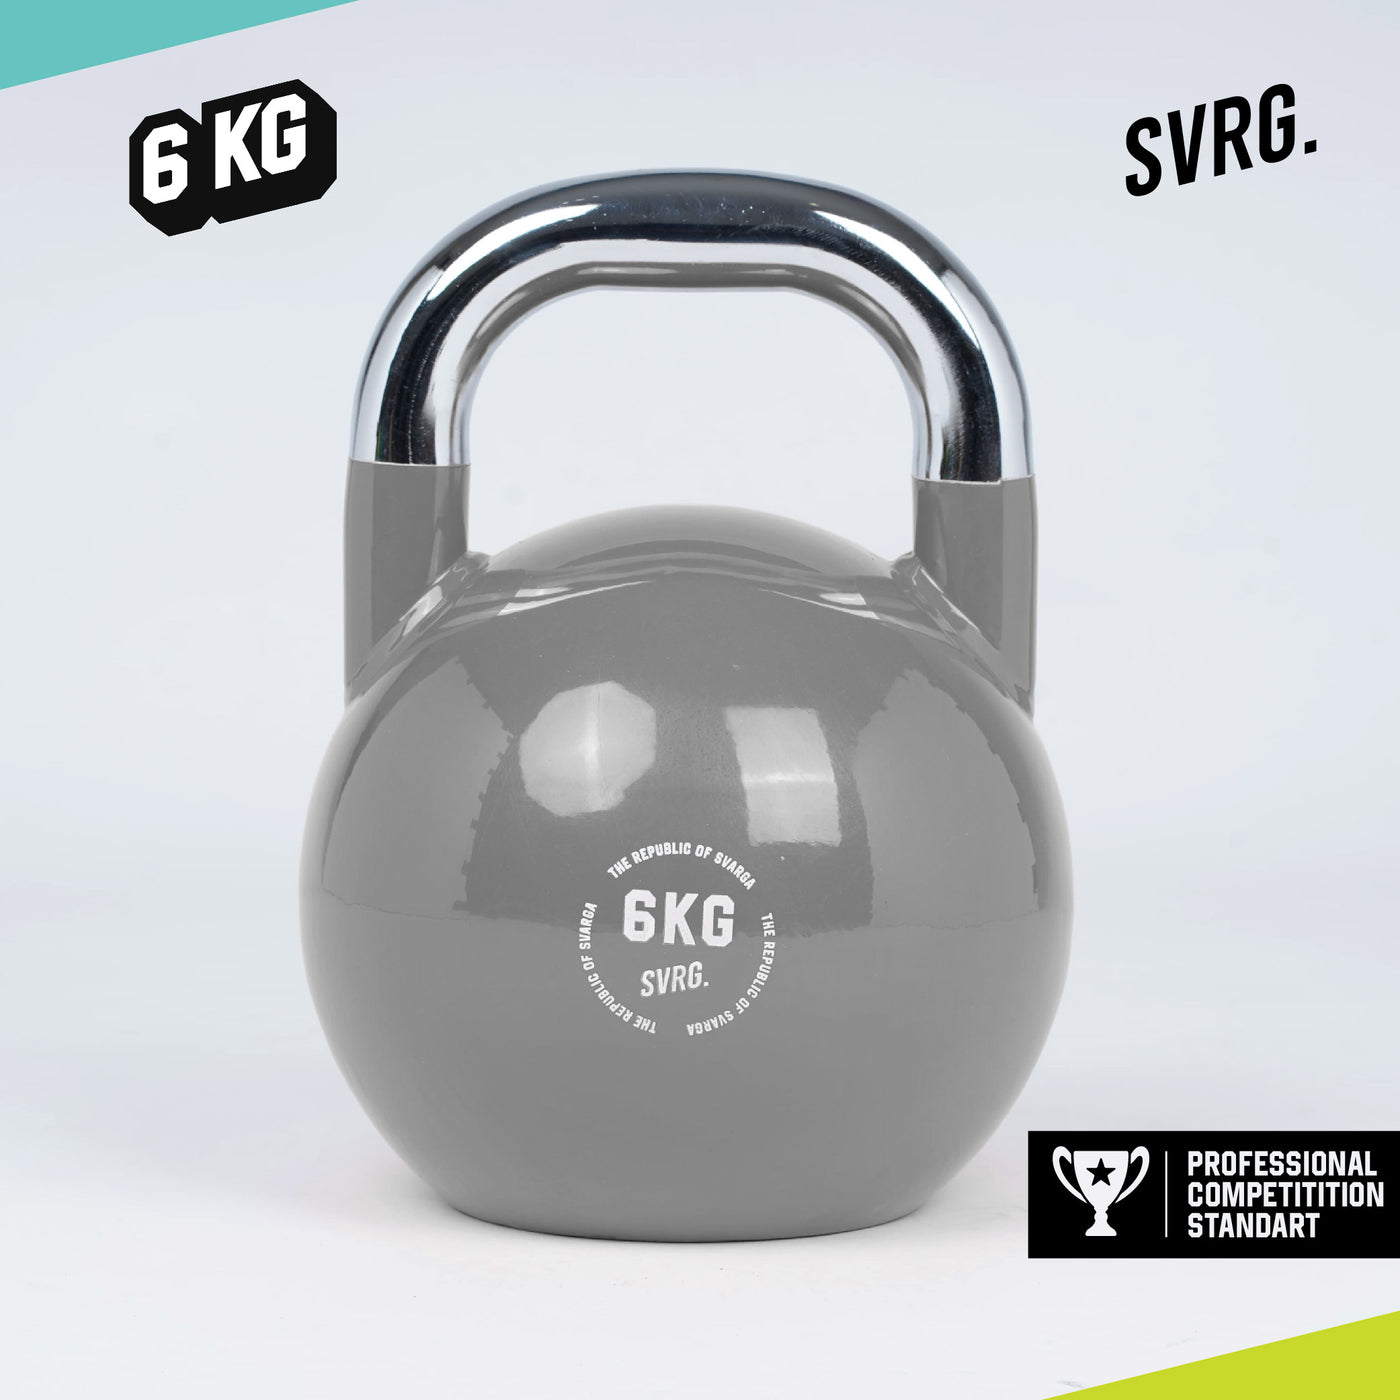 Kettlebell Competition Grade